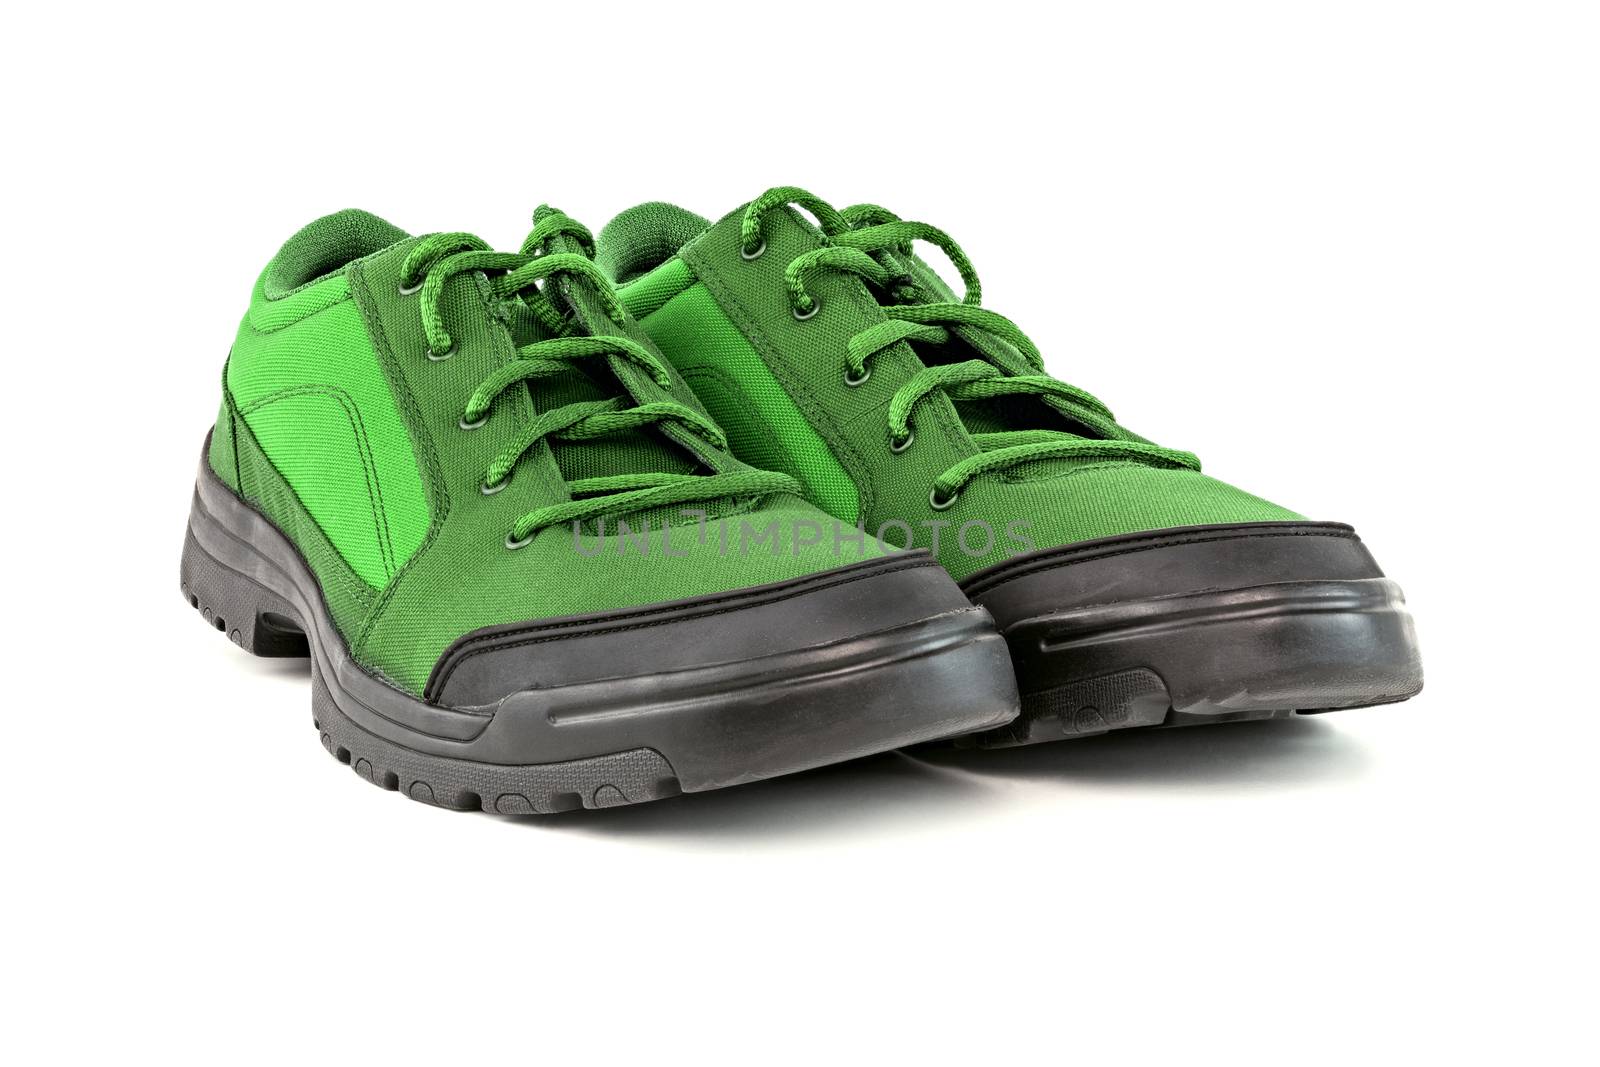 two simple green hiking or hunting shoe isolated on white background.